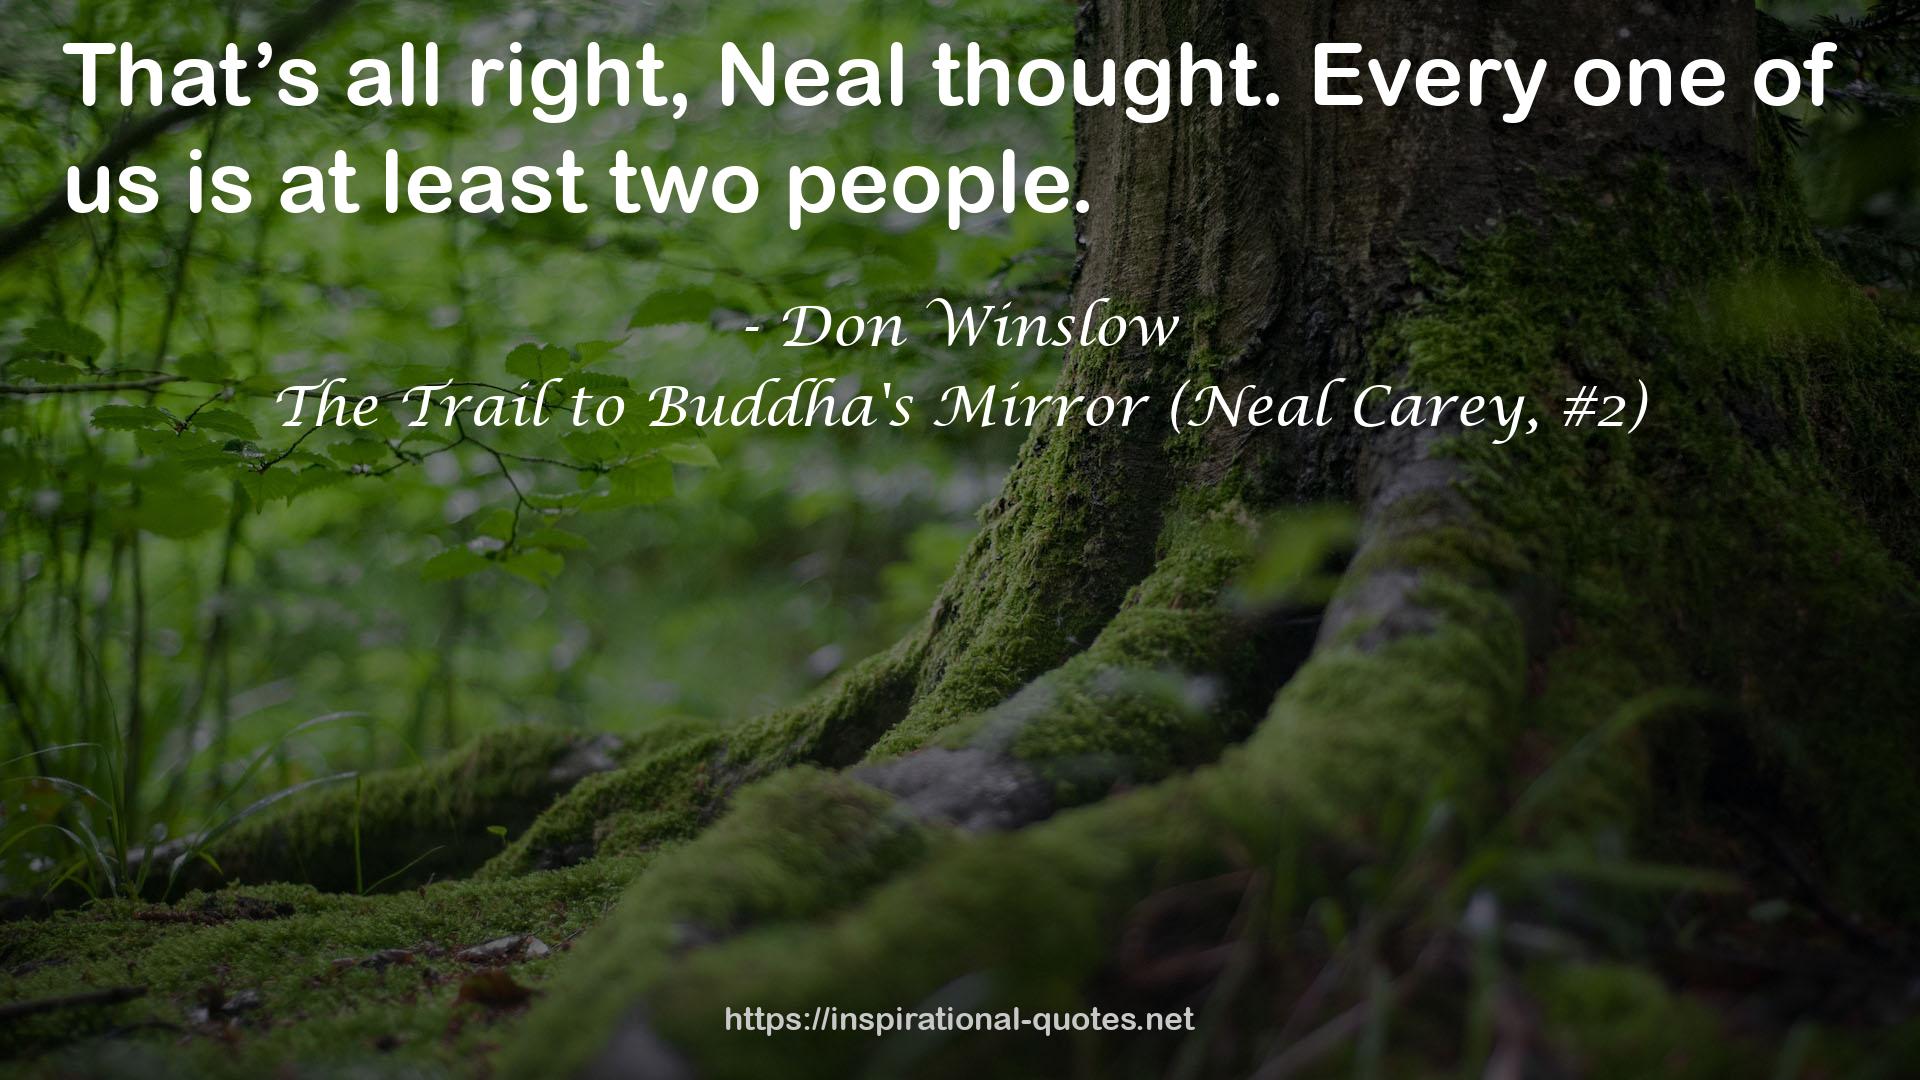 The Trail to Buddha's Mirror (Neal Carey, #2) QUOTES